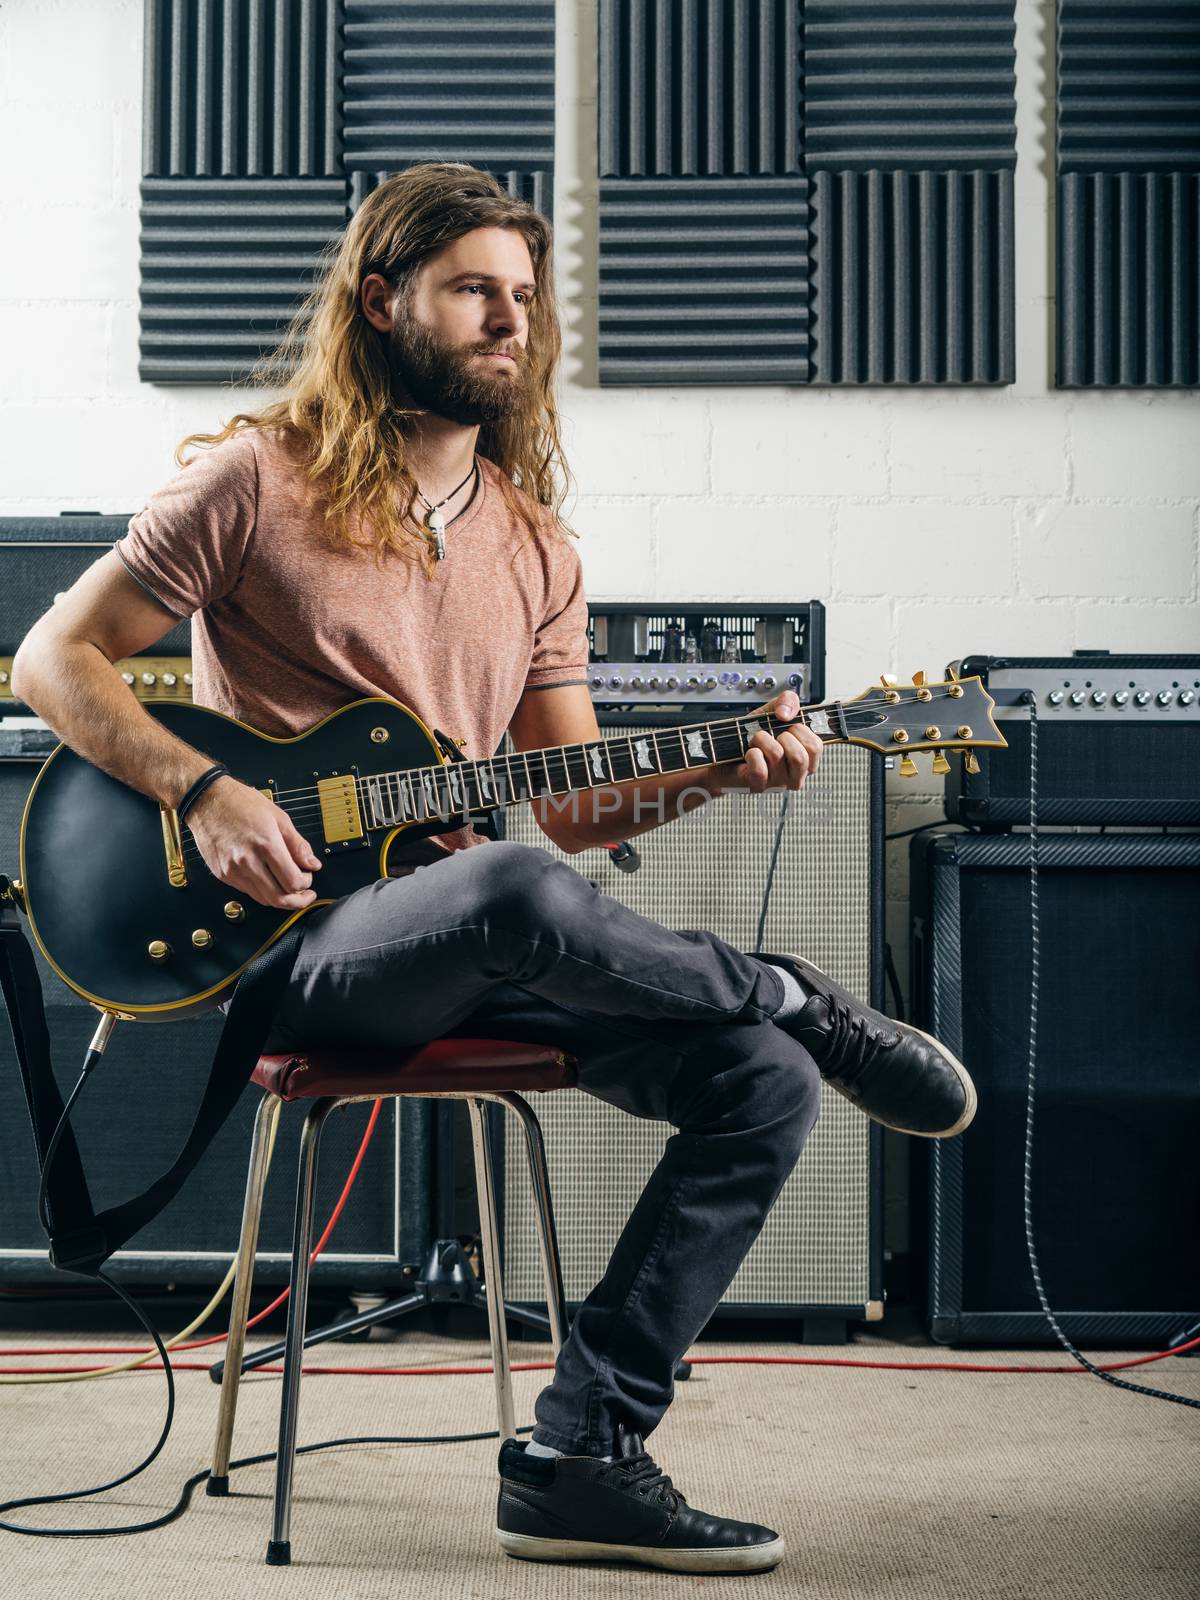 Photo of a young man with long hair and beard playing electric guitar in a recording studio.